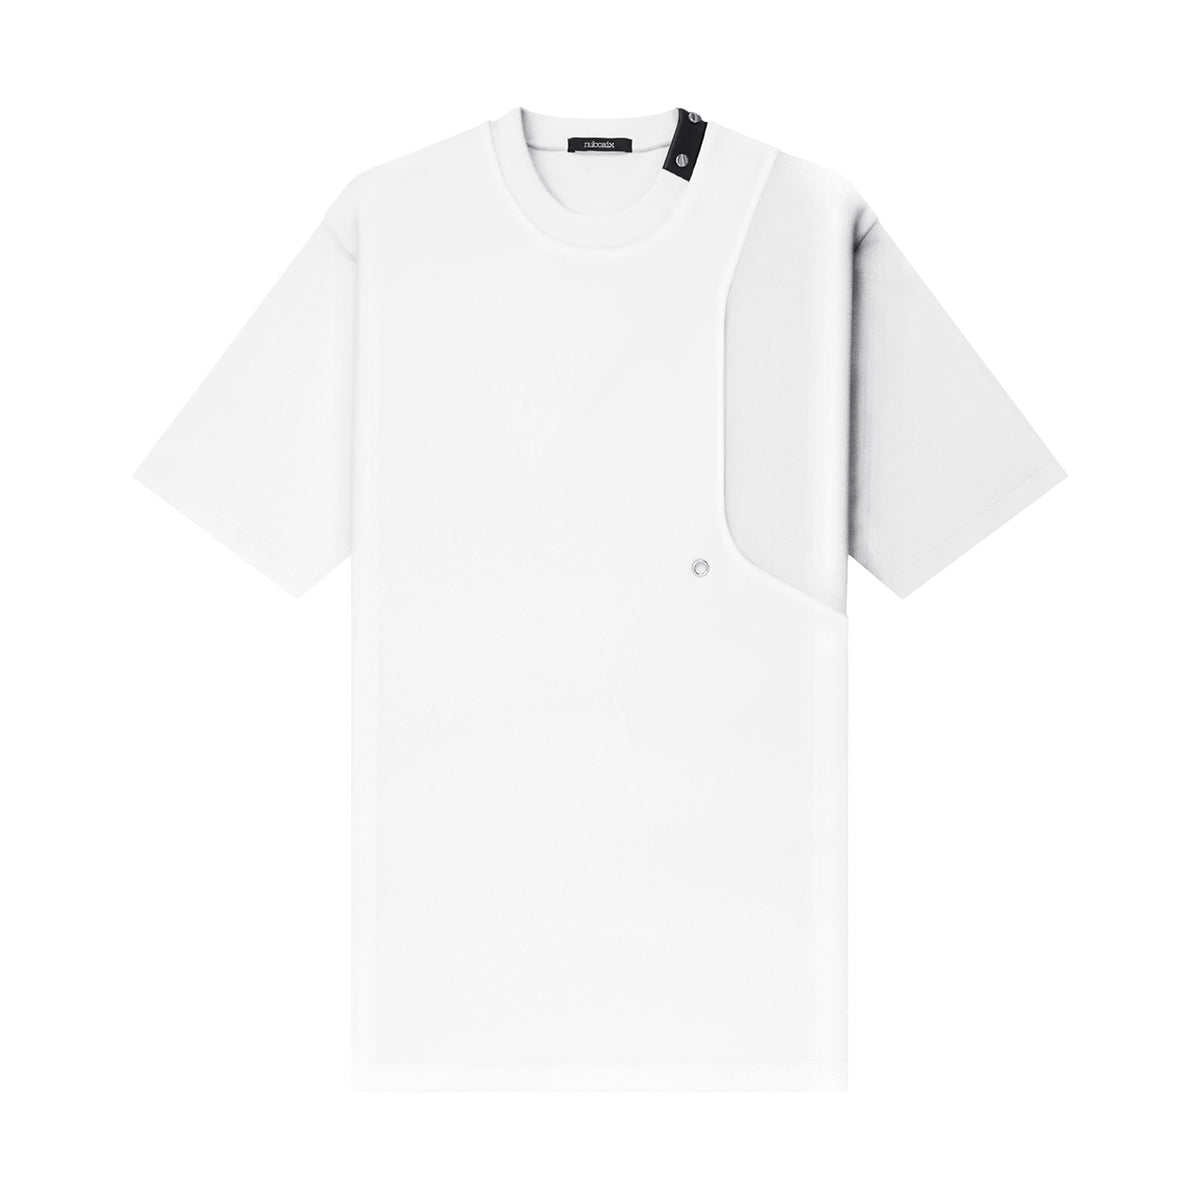 Mixed Material Pocket Tee [White]